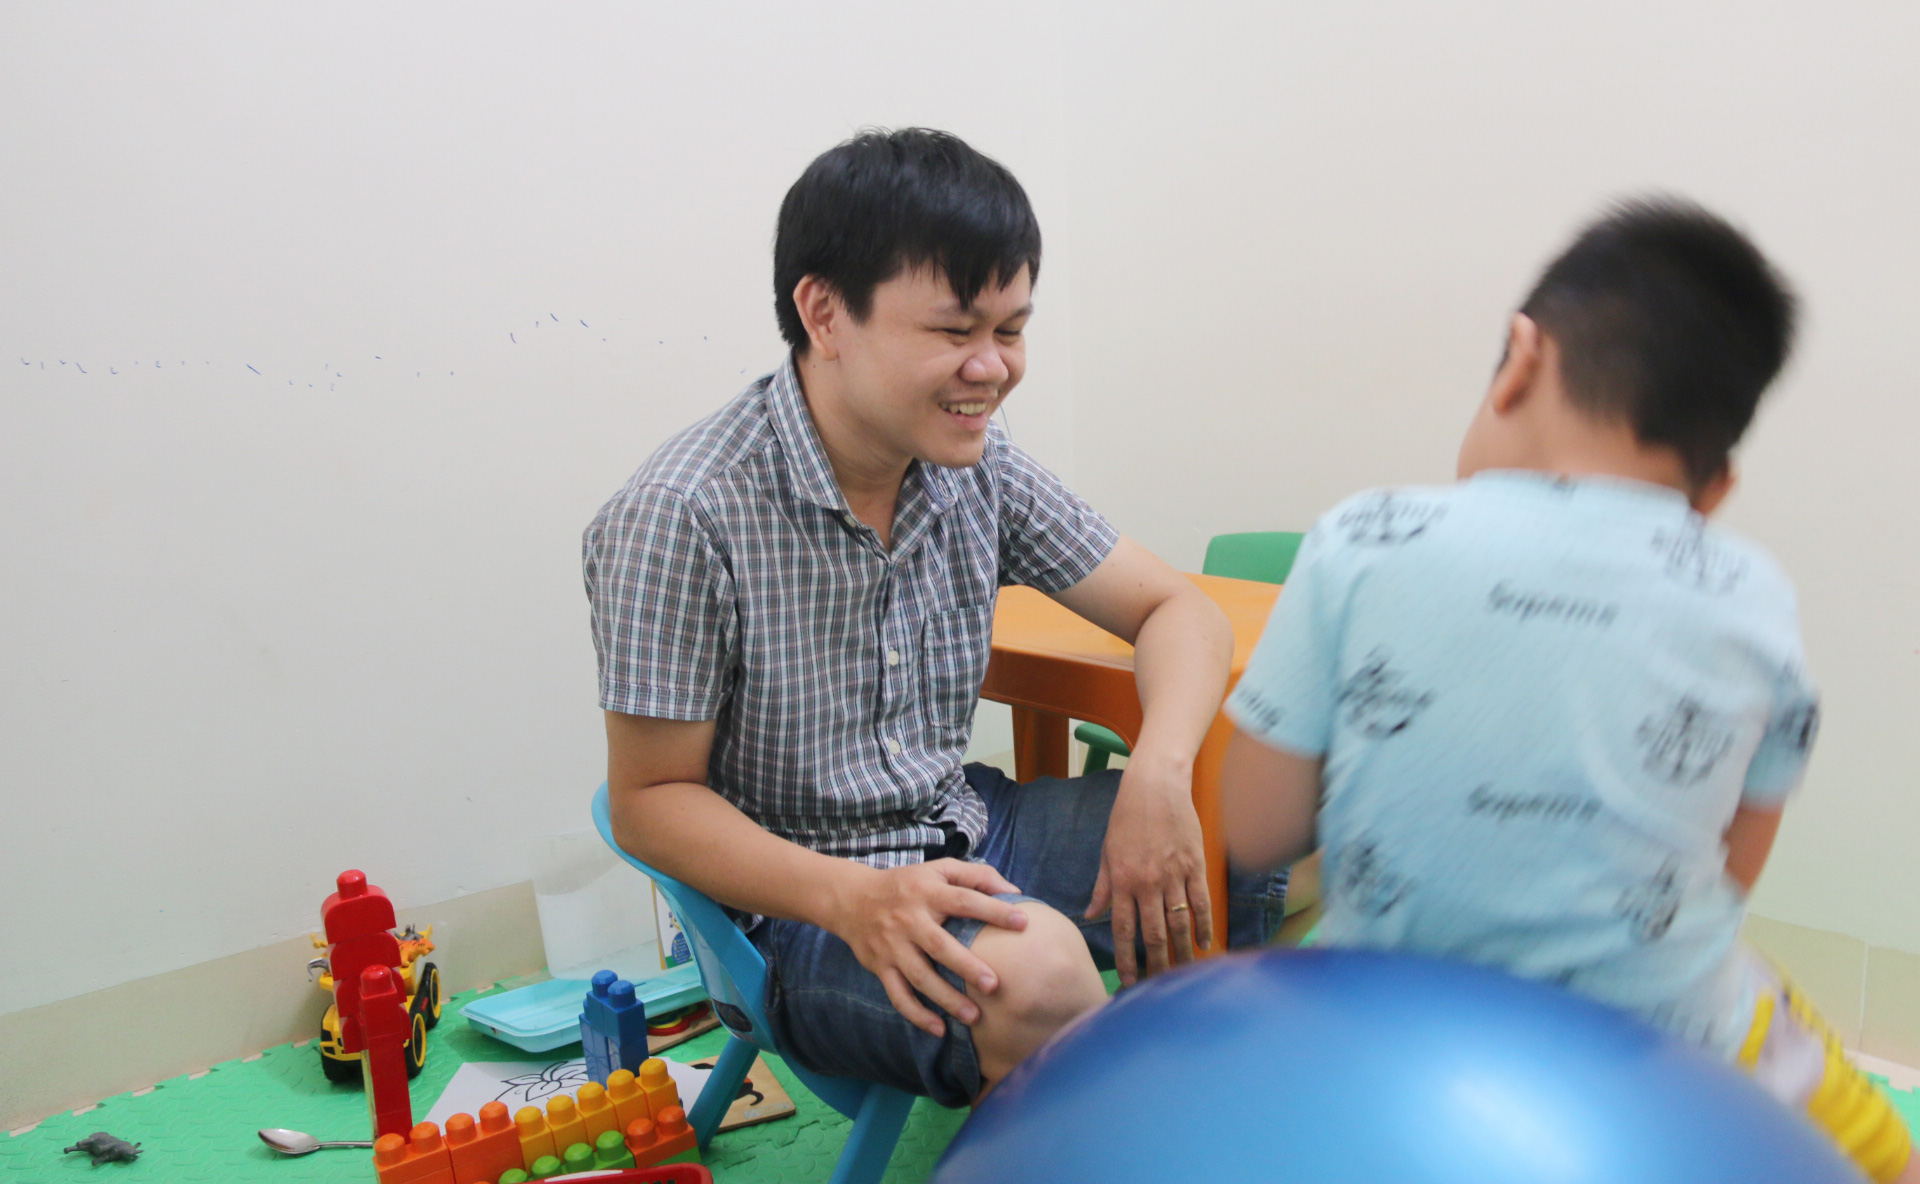 In central Vietnam, special education teacher devotes over a decade to autistic children